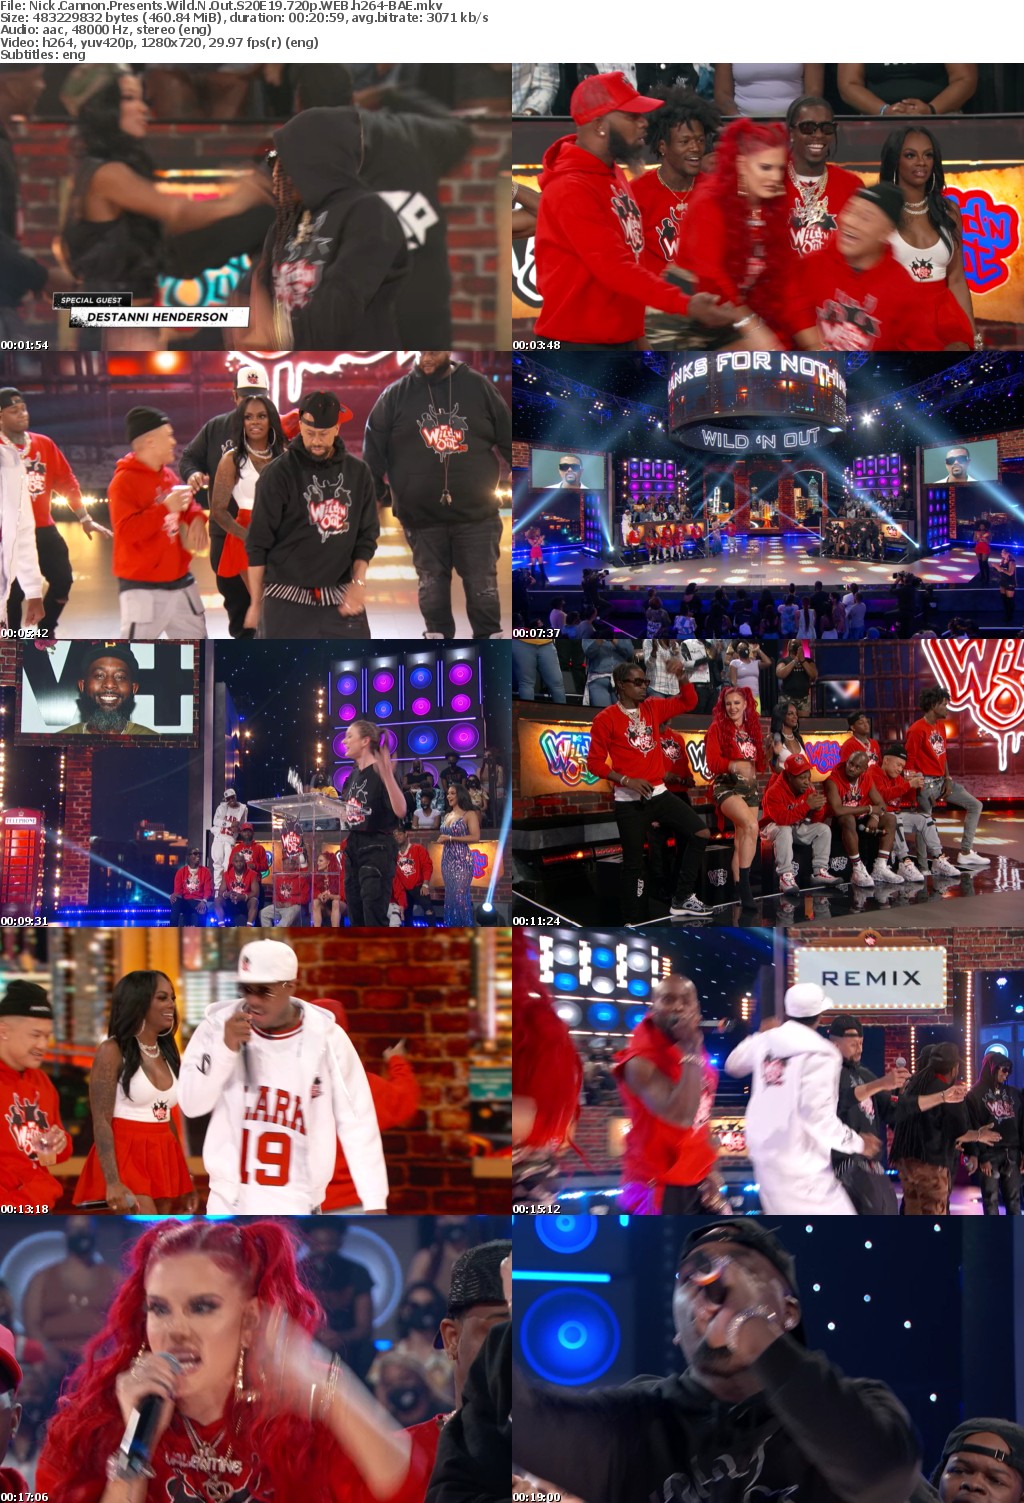 Nick Cannon Presents Wild N Out S20E19 720p WEB h264-BAE